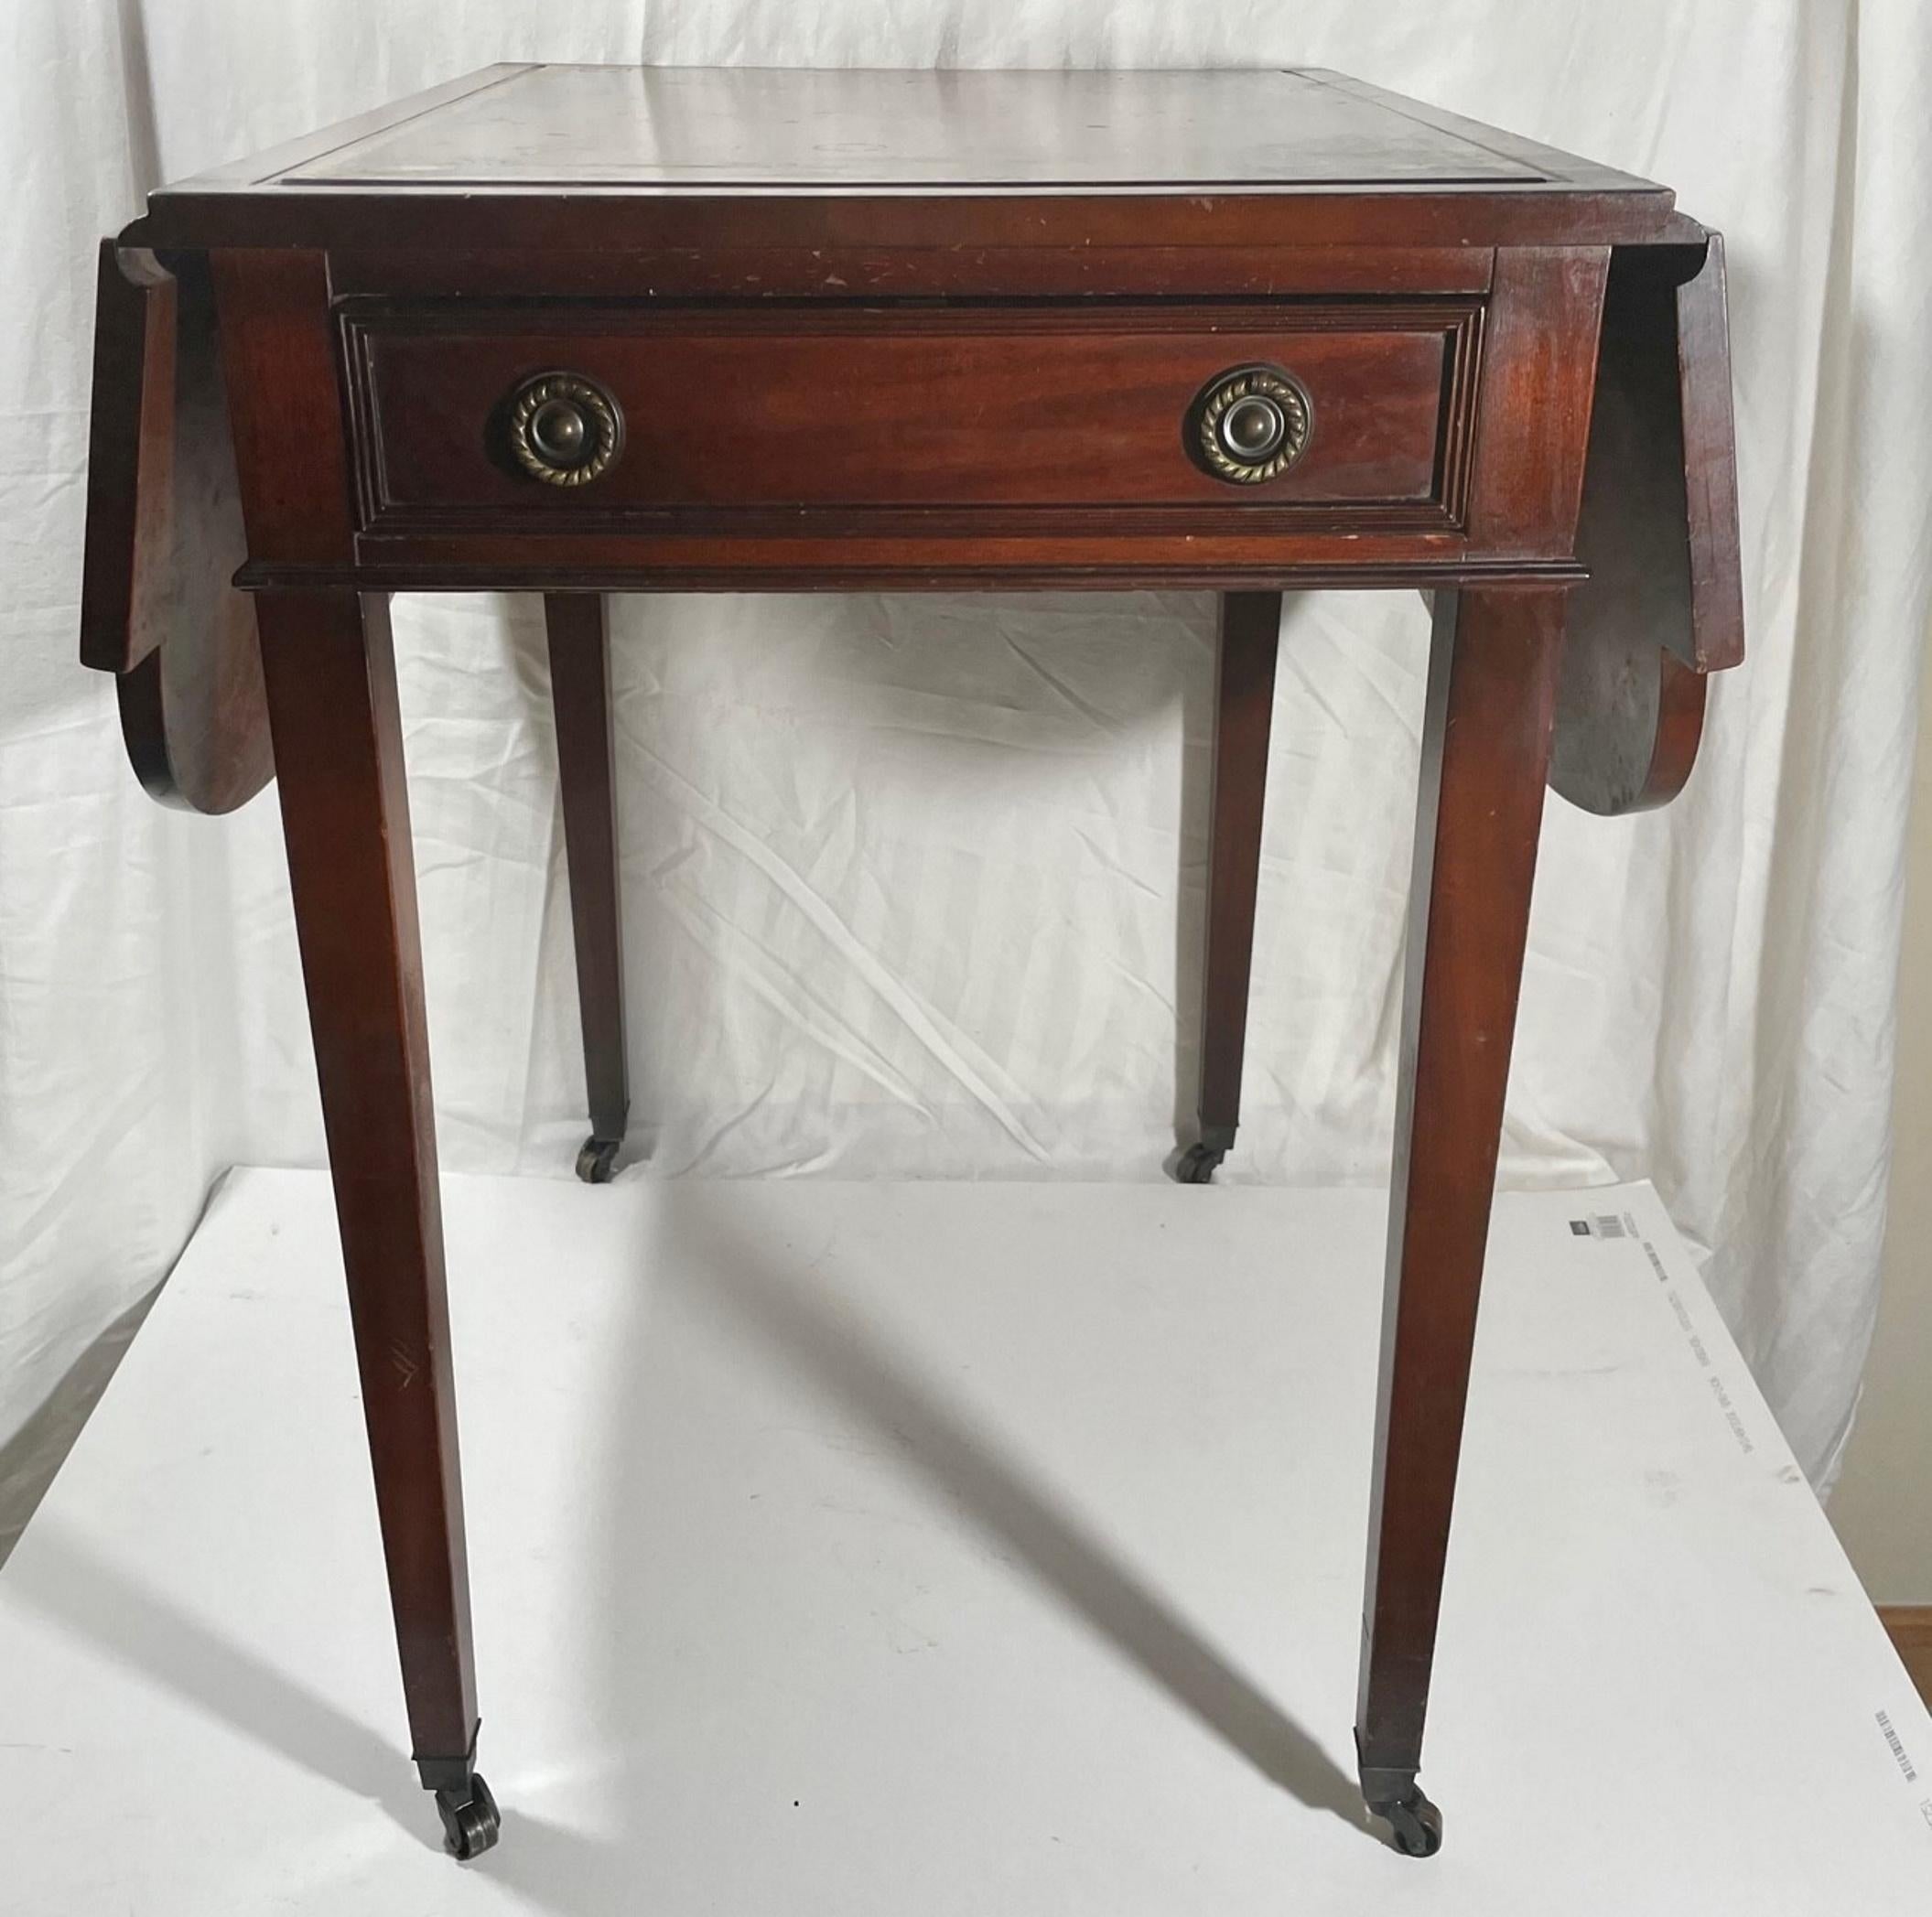 Vintage Mahogany Pembroke table, Gordon’s Fine Furniture, Inc.

A Classic Pembroke table by Gordon’s Fine Furniture, Inc. made of mahogany with tooled leather writing surface. Single drawer to one side with brass pulls. Flaps on either side that